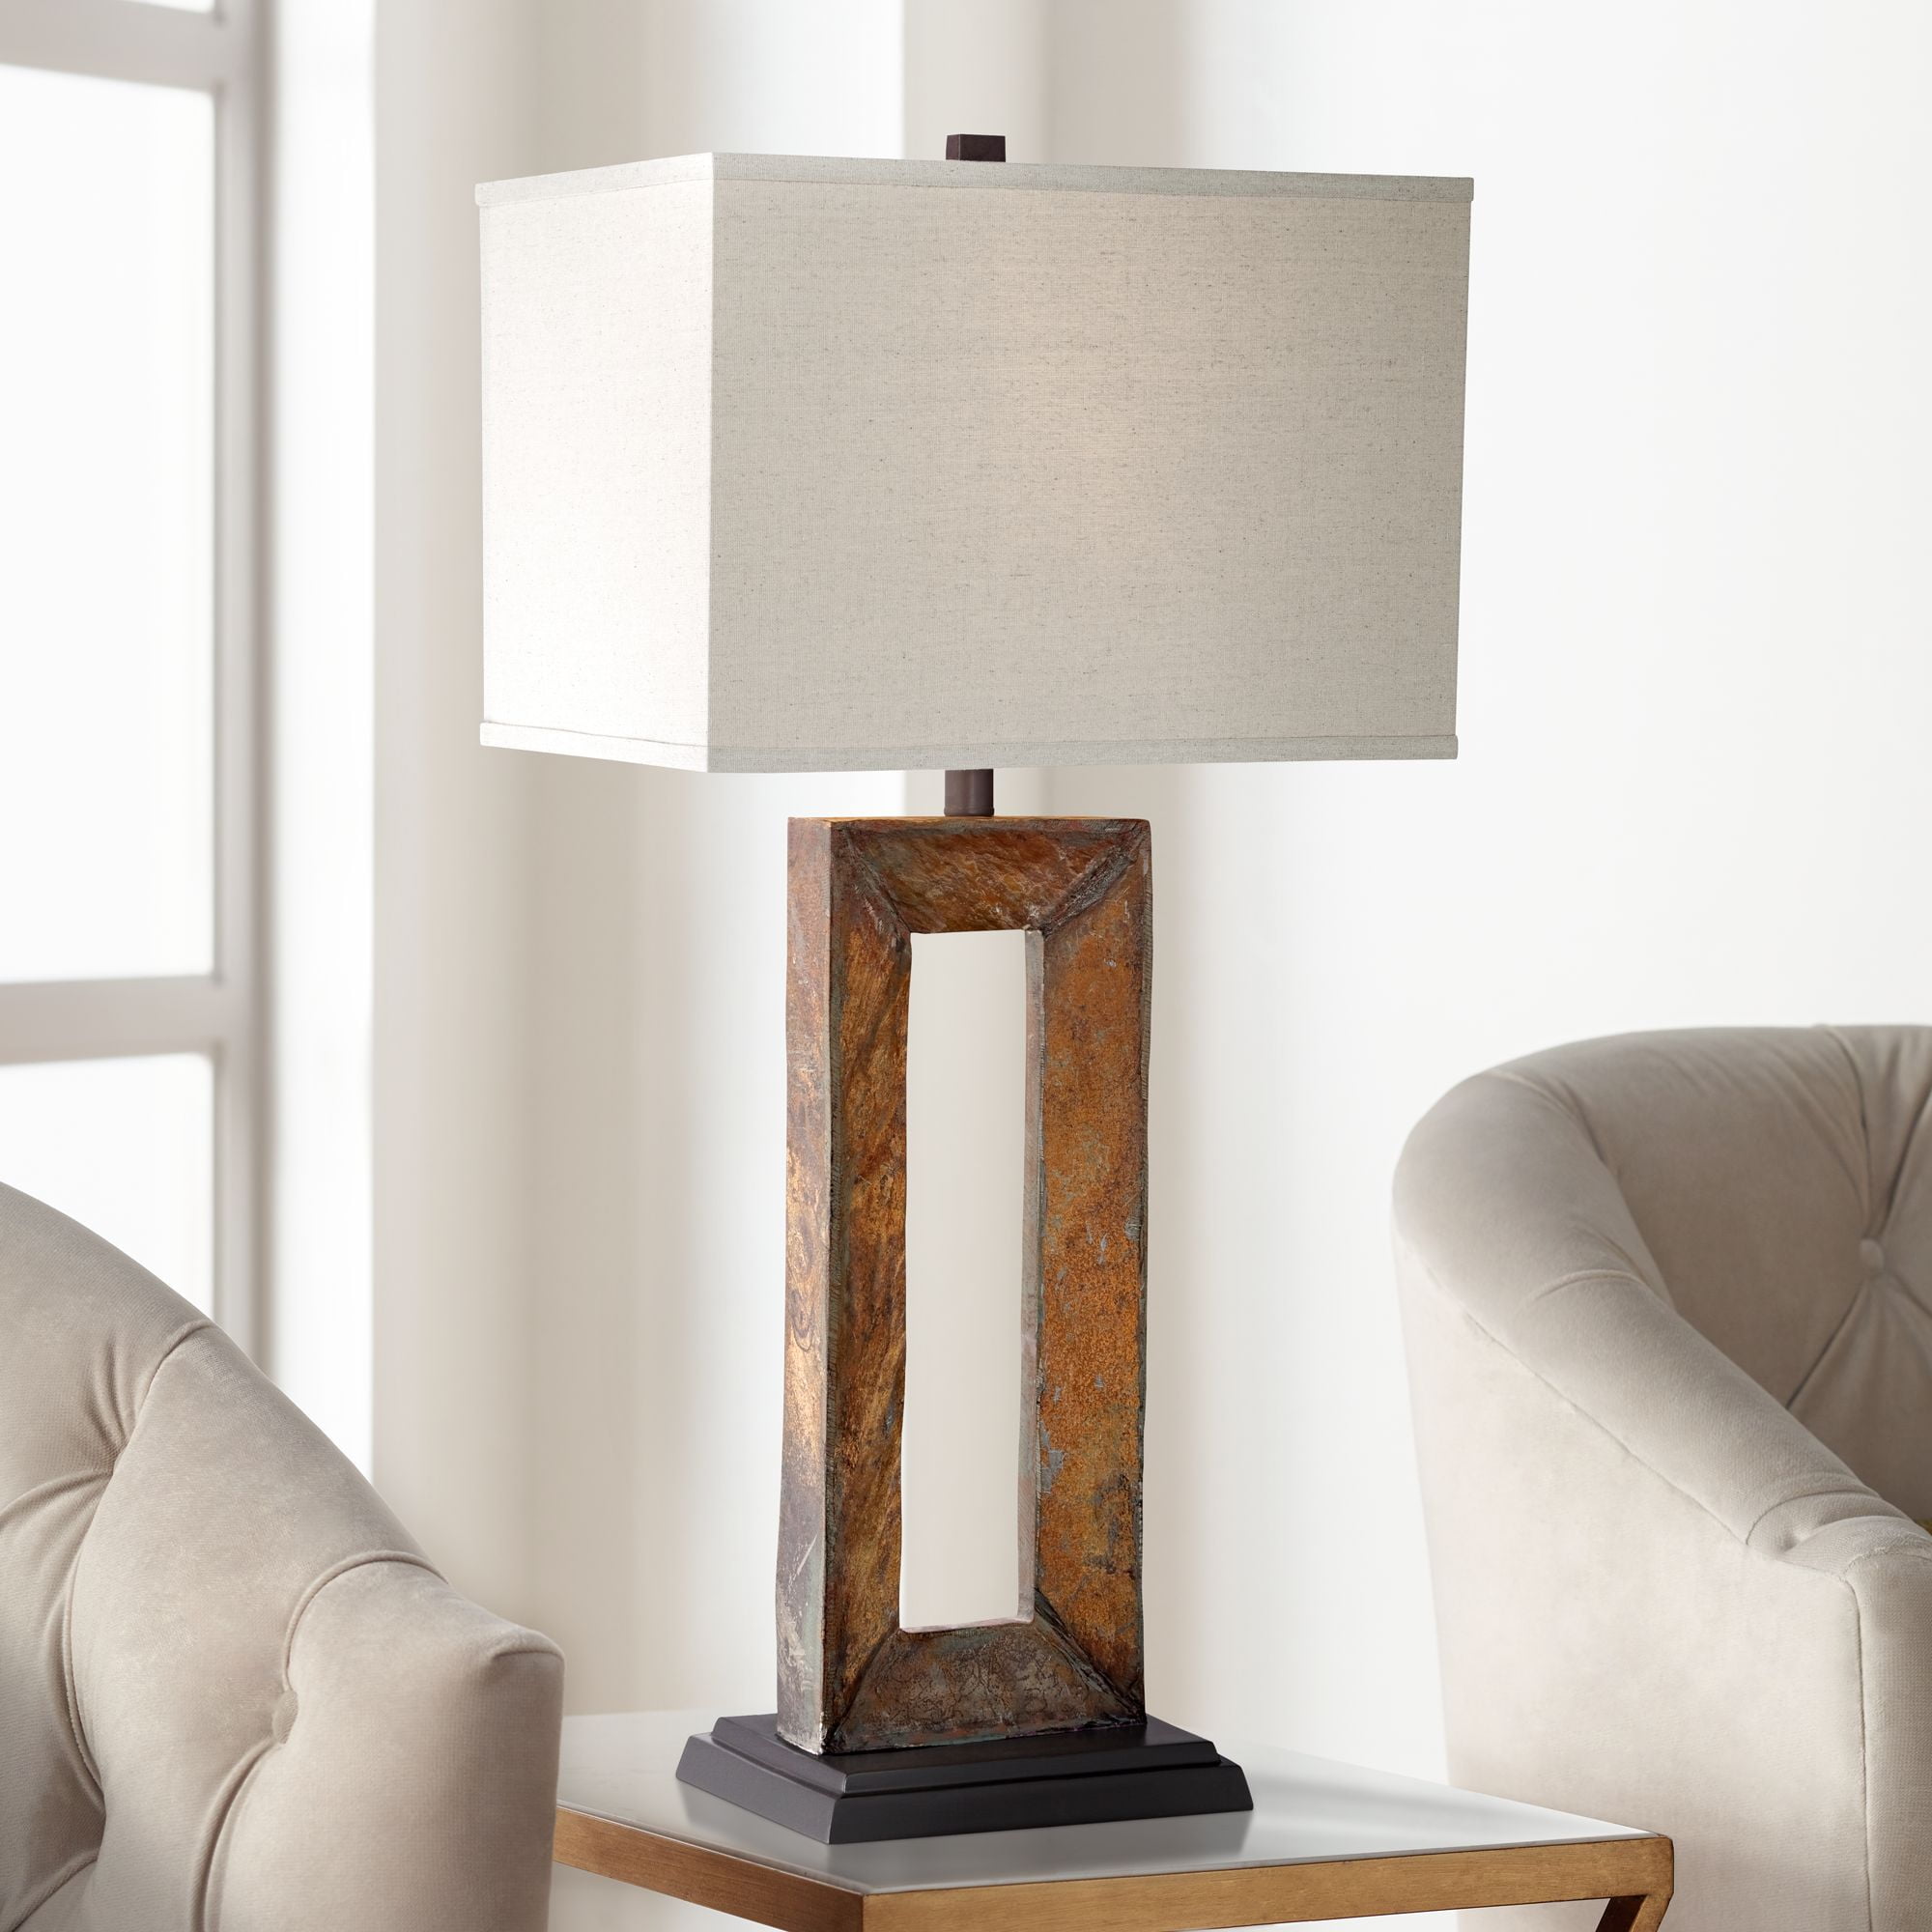 Franklin Iron Works Rustic Table Lamp Natural Slate Off White Rectangular Shade for Living Room